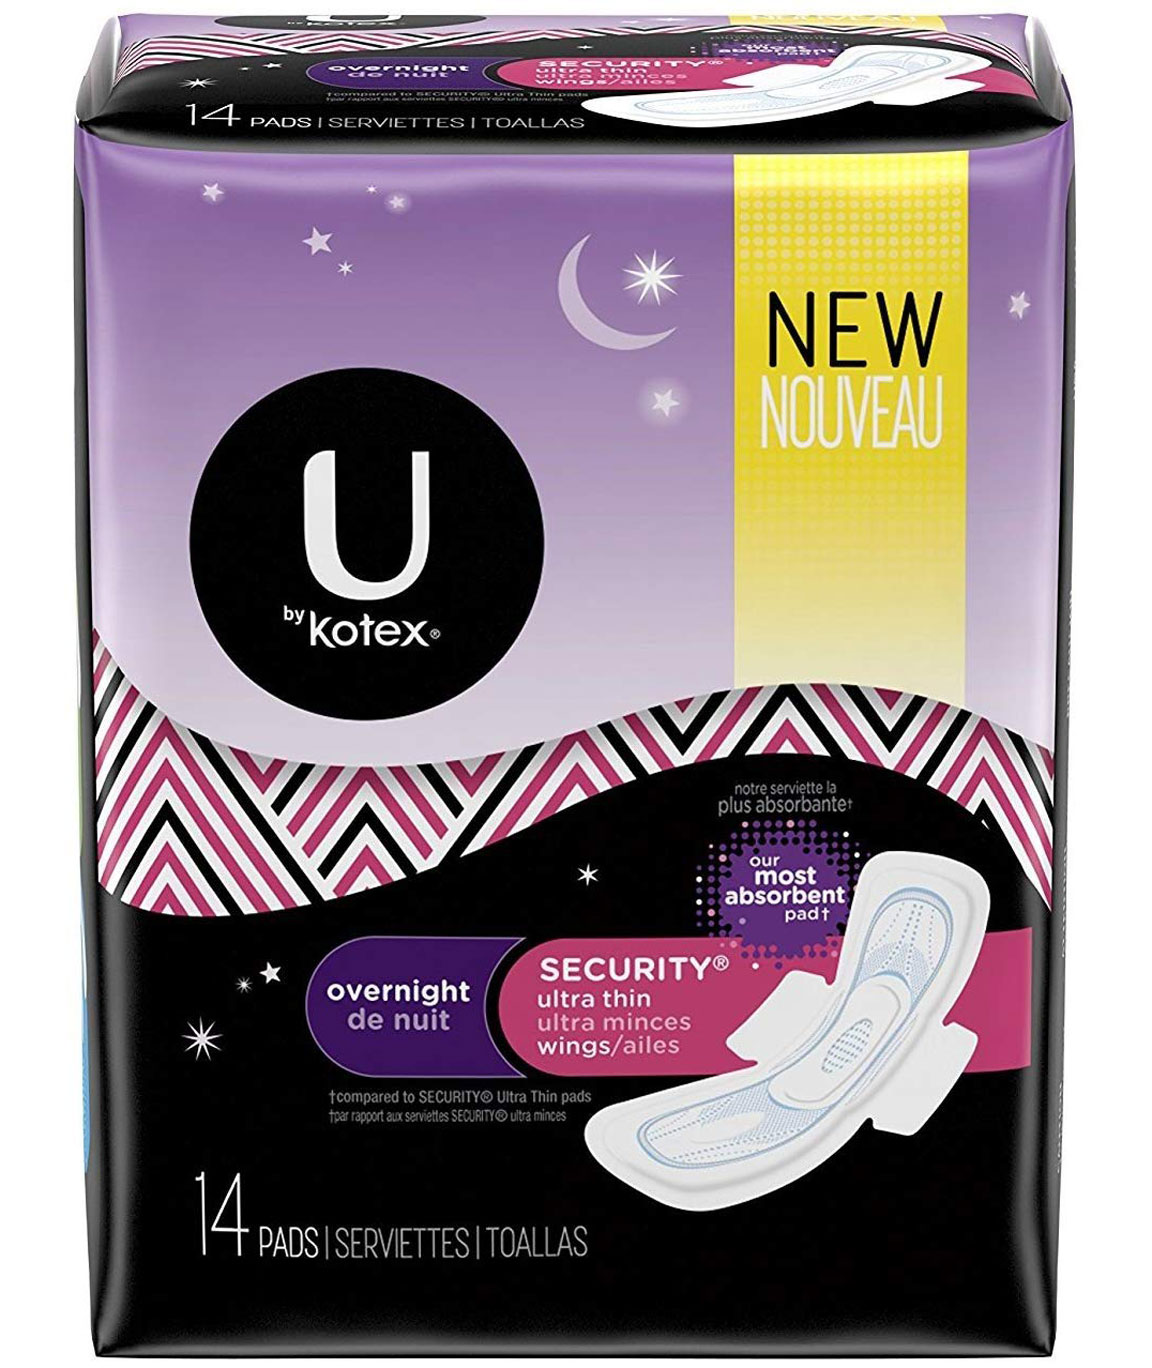 U by Kotex Overnight Security Ultra Thin Pads With Wings 14 count